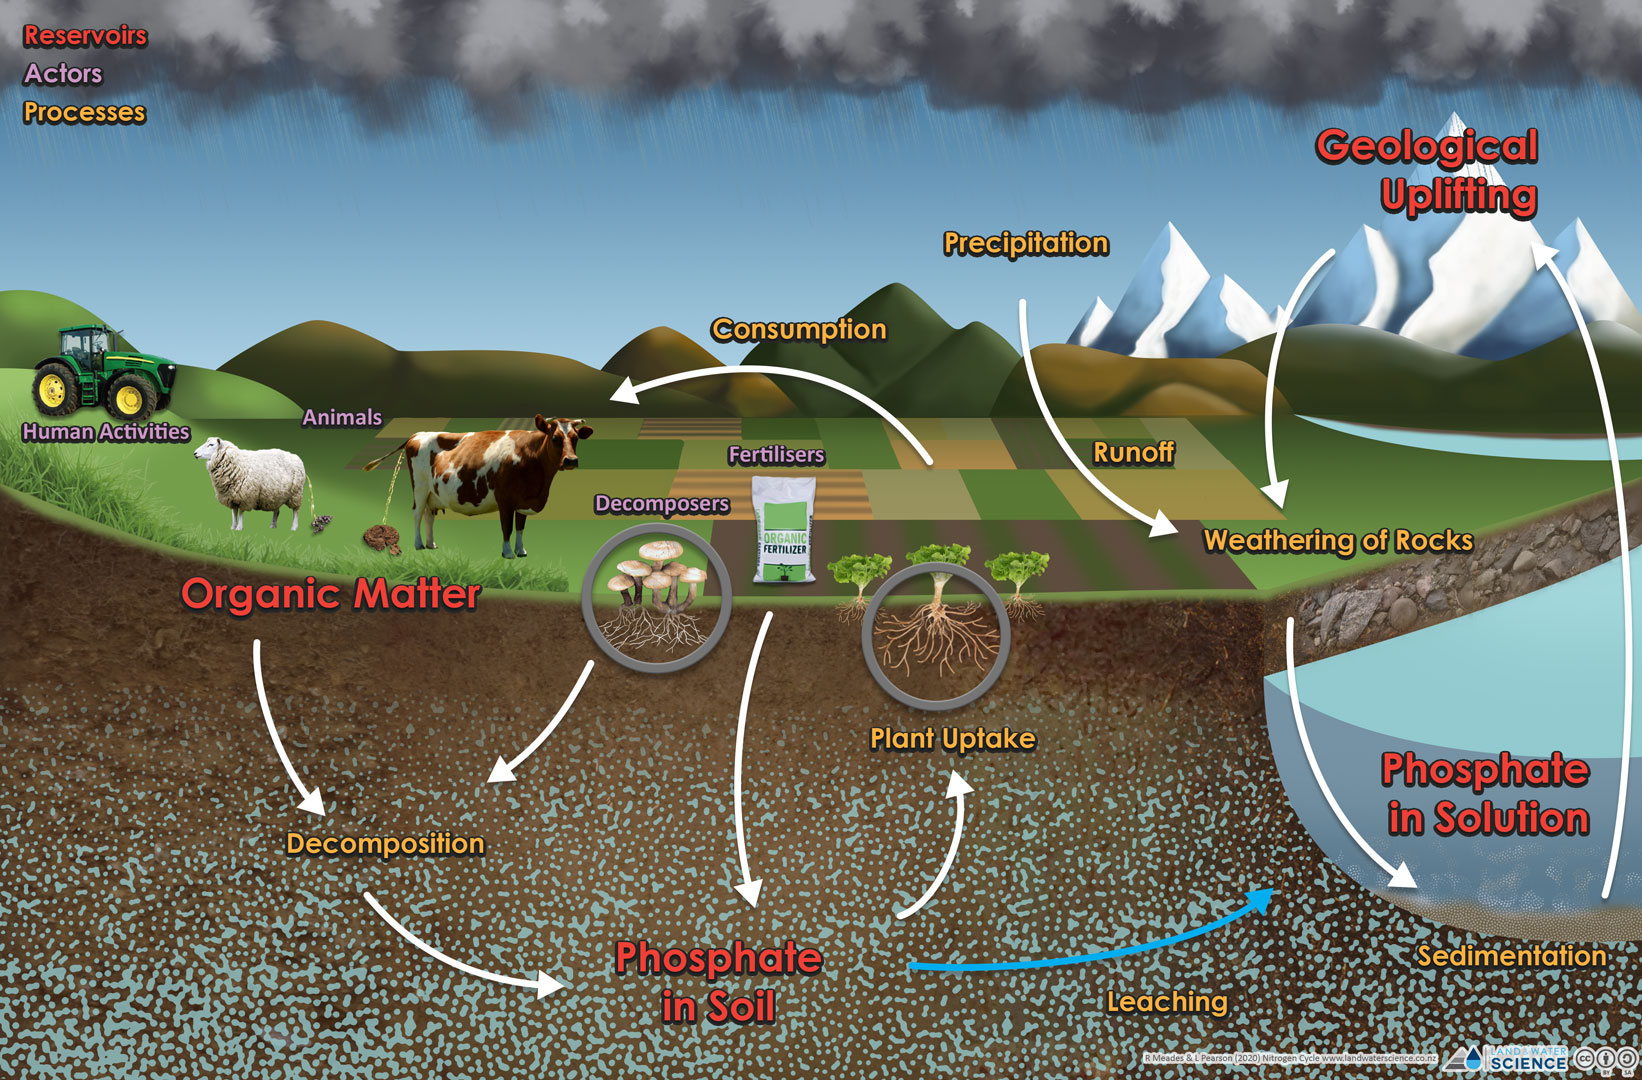 A diagram showing the movement of Phosphorus though the soil, water, and atmosphere.